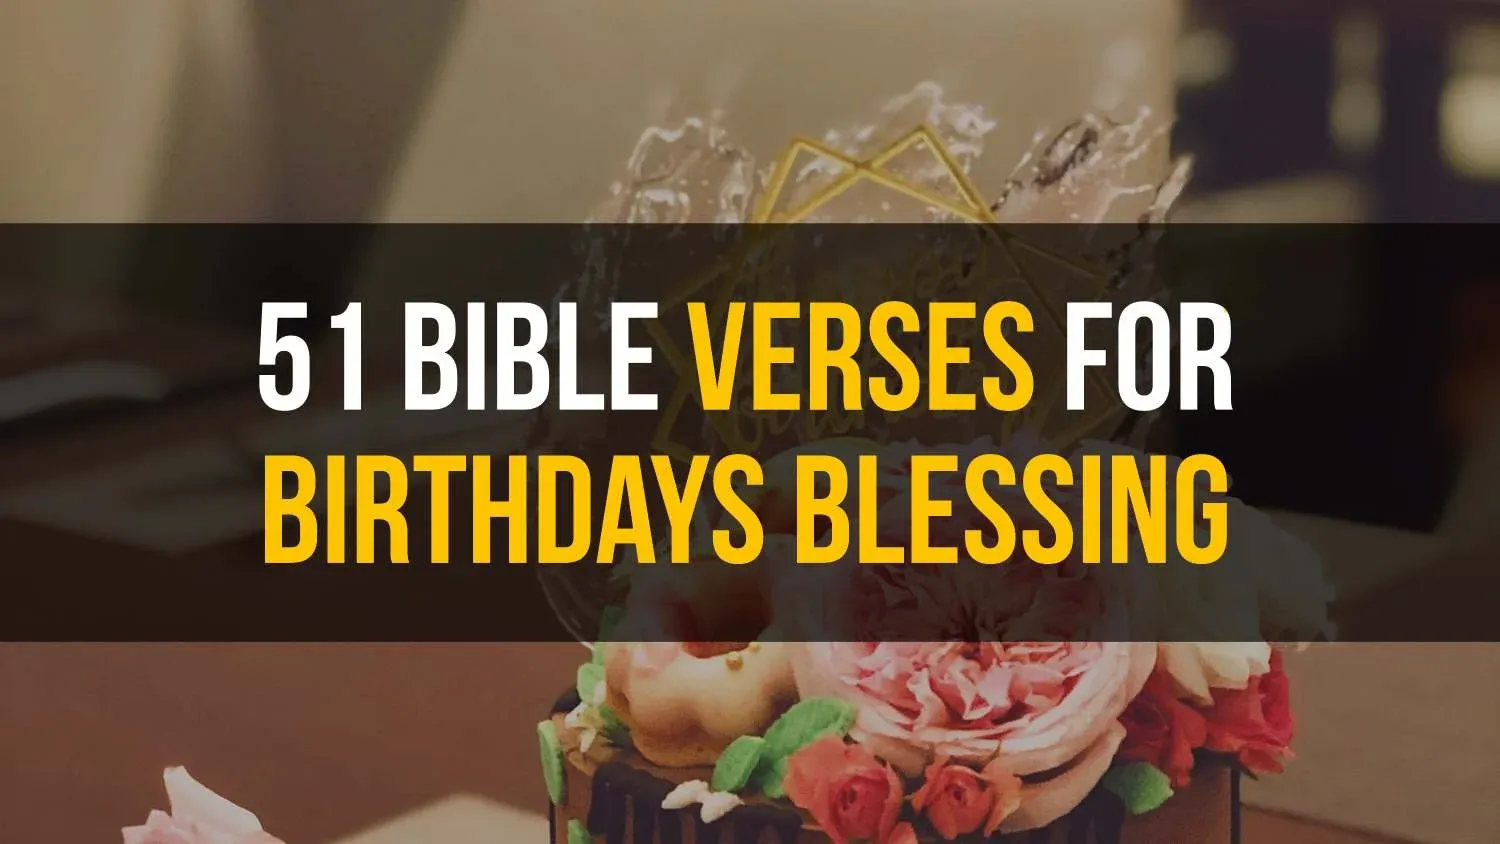 51 Bible verses for birthday, Bible verses for birthdays blessing